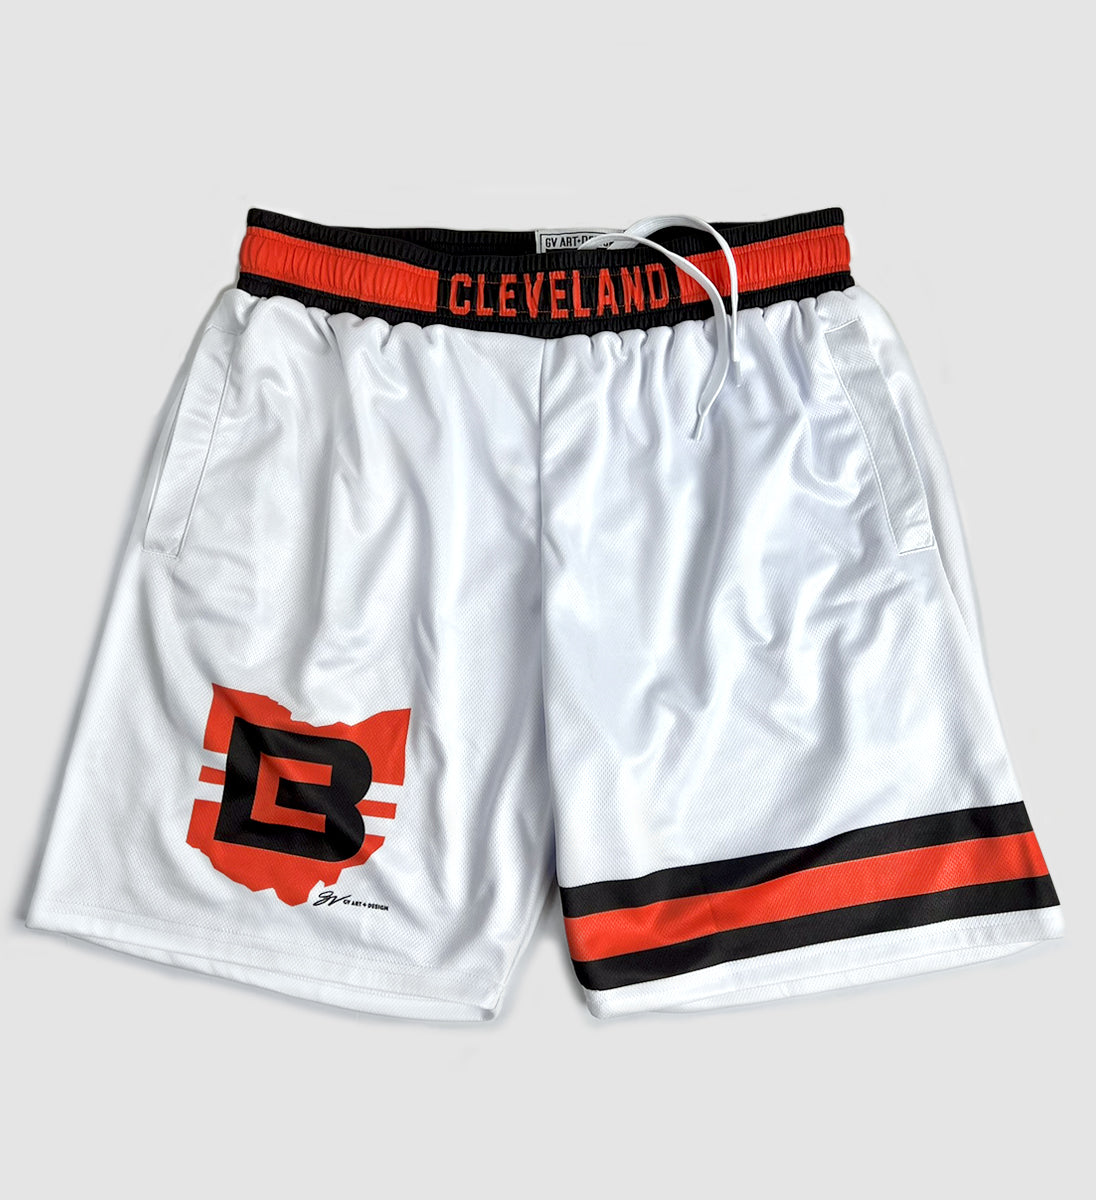 Cleveland Cavaliers Shorts, Cavaliers Basketball Shorts, Running